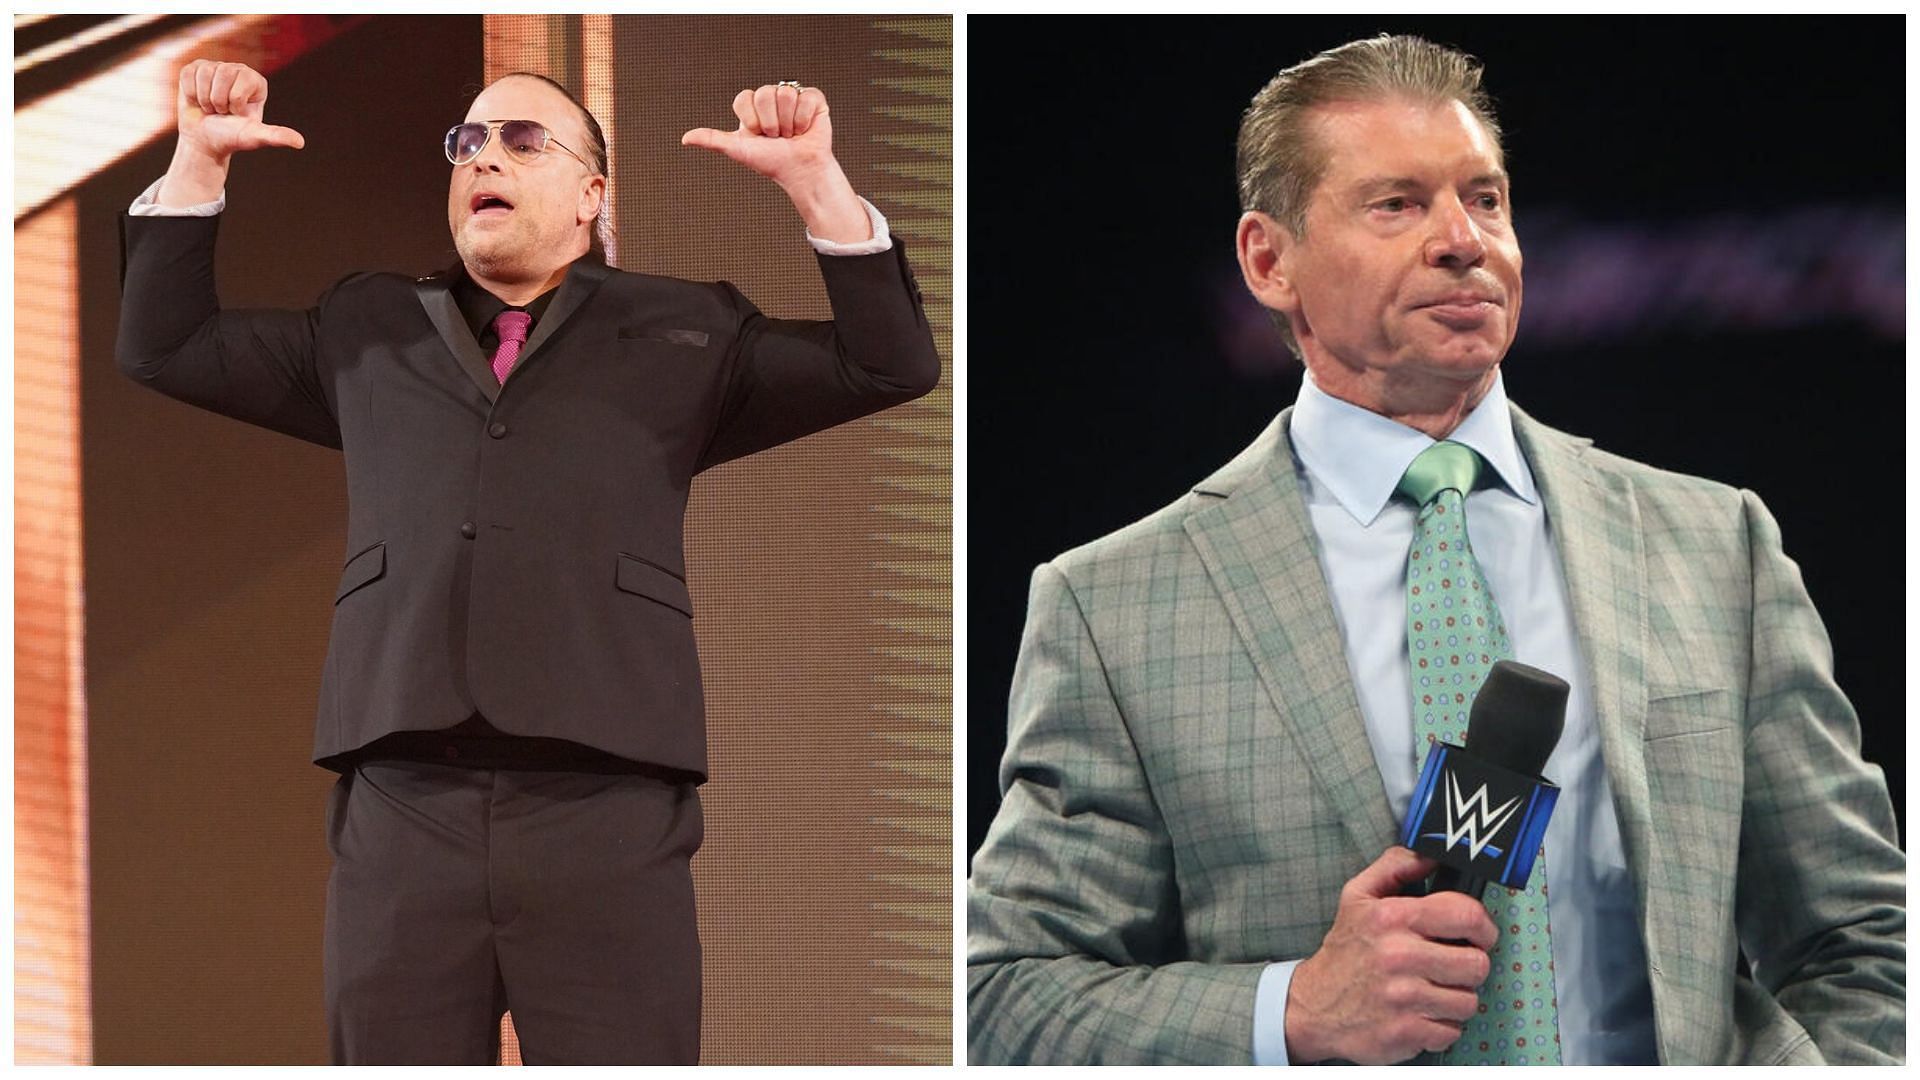 Rob Van Dam (left) and Vince McMahon (right).